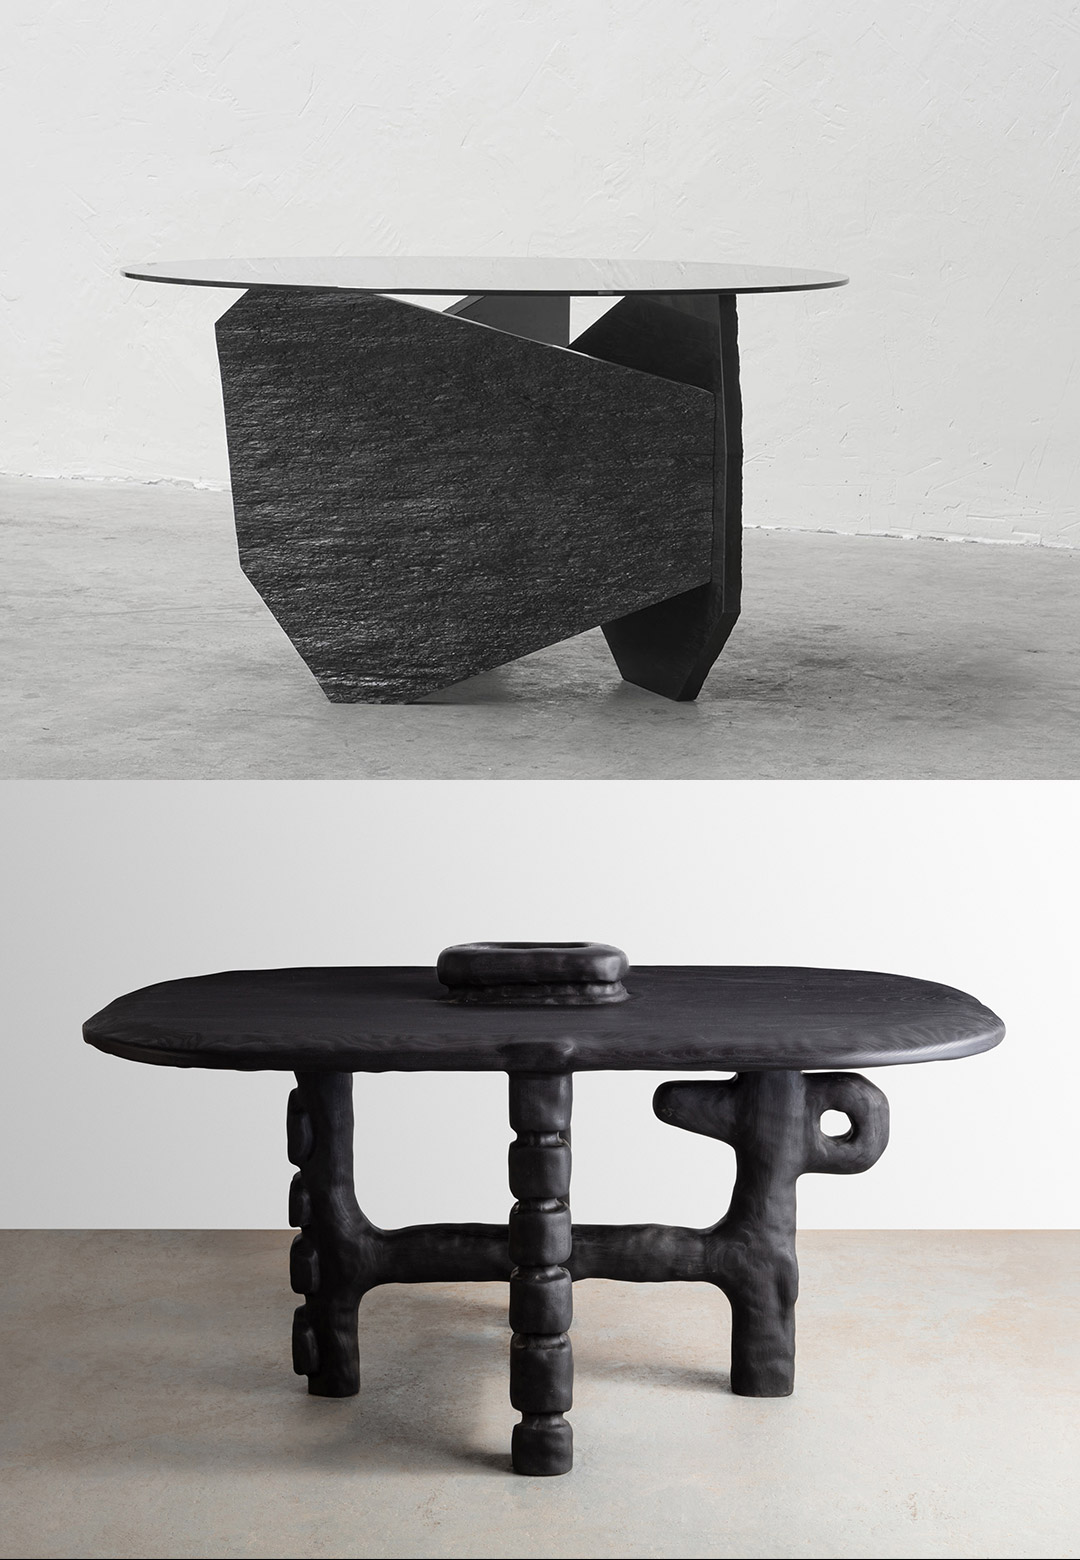 Urban to industrial design: 10 modern dining tables to elevate your home interiors